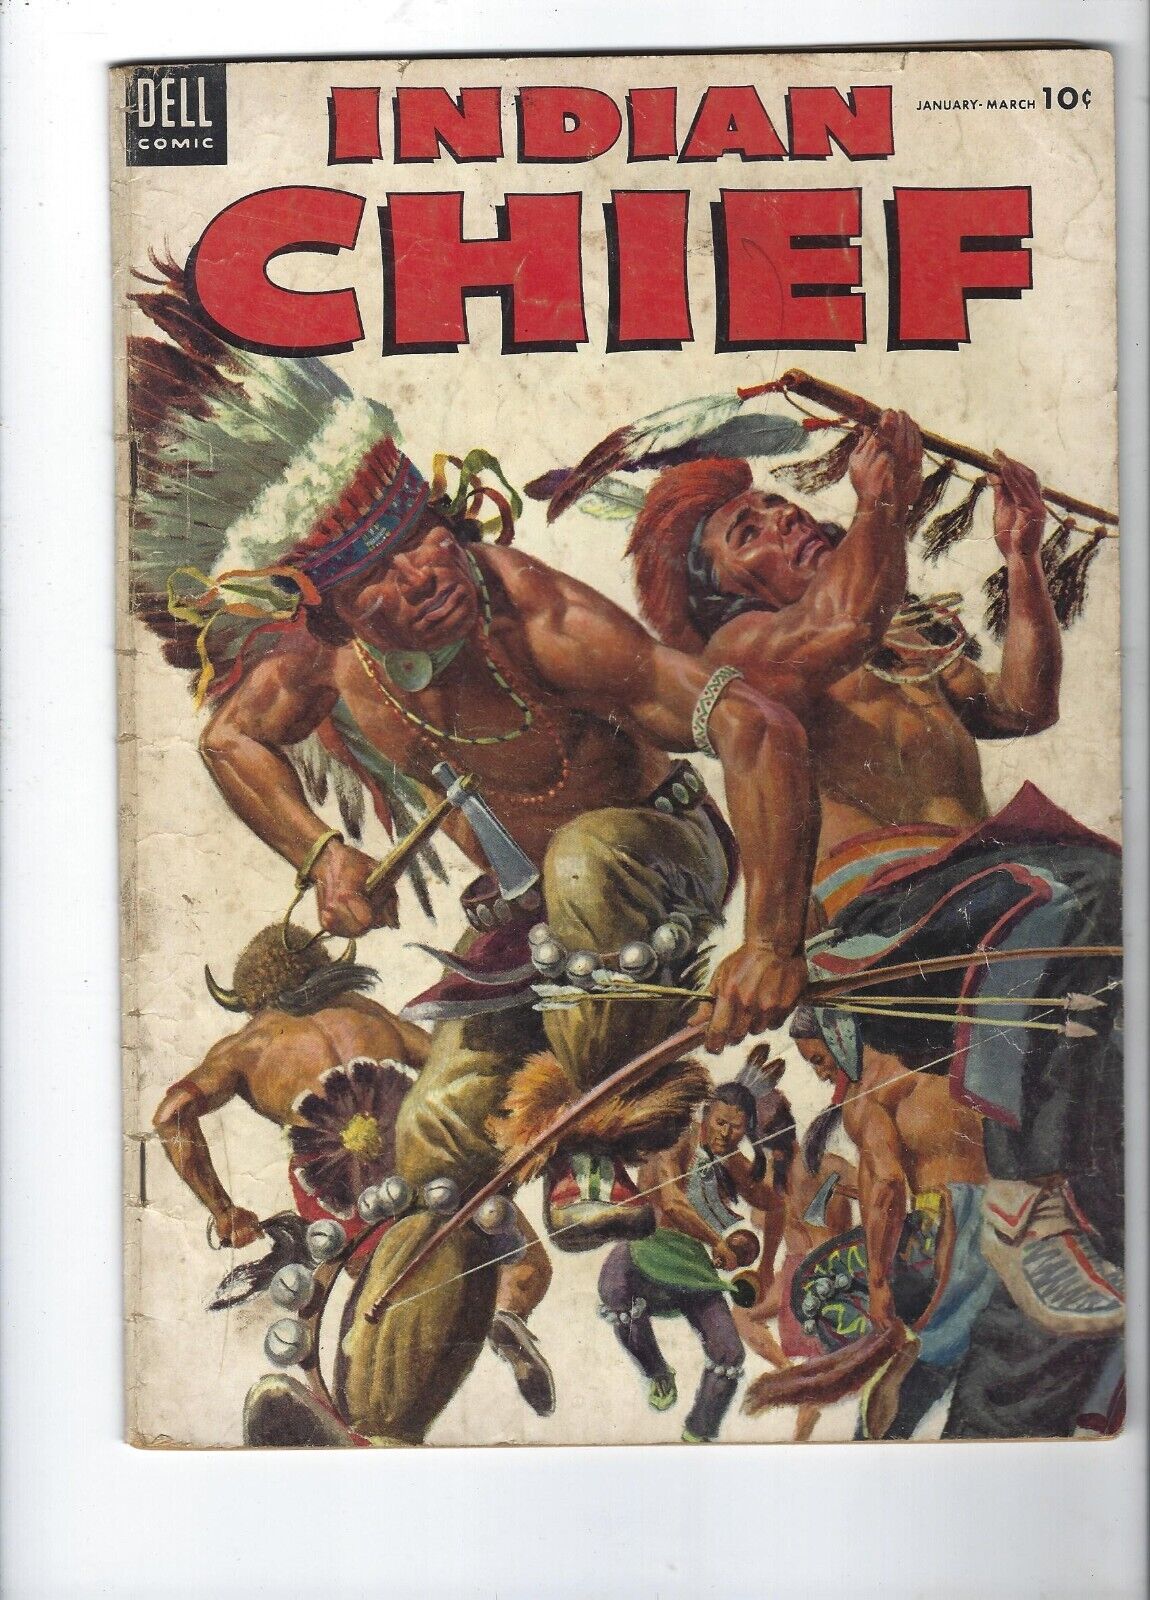 INDIAN CHIEF featuring White Eagle No. 13 Jan.-Mar. 1954 Golden Age Dell Comic